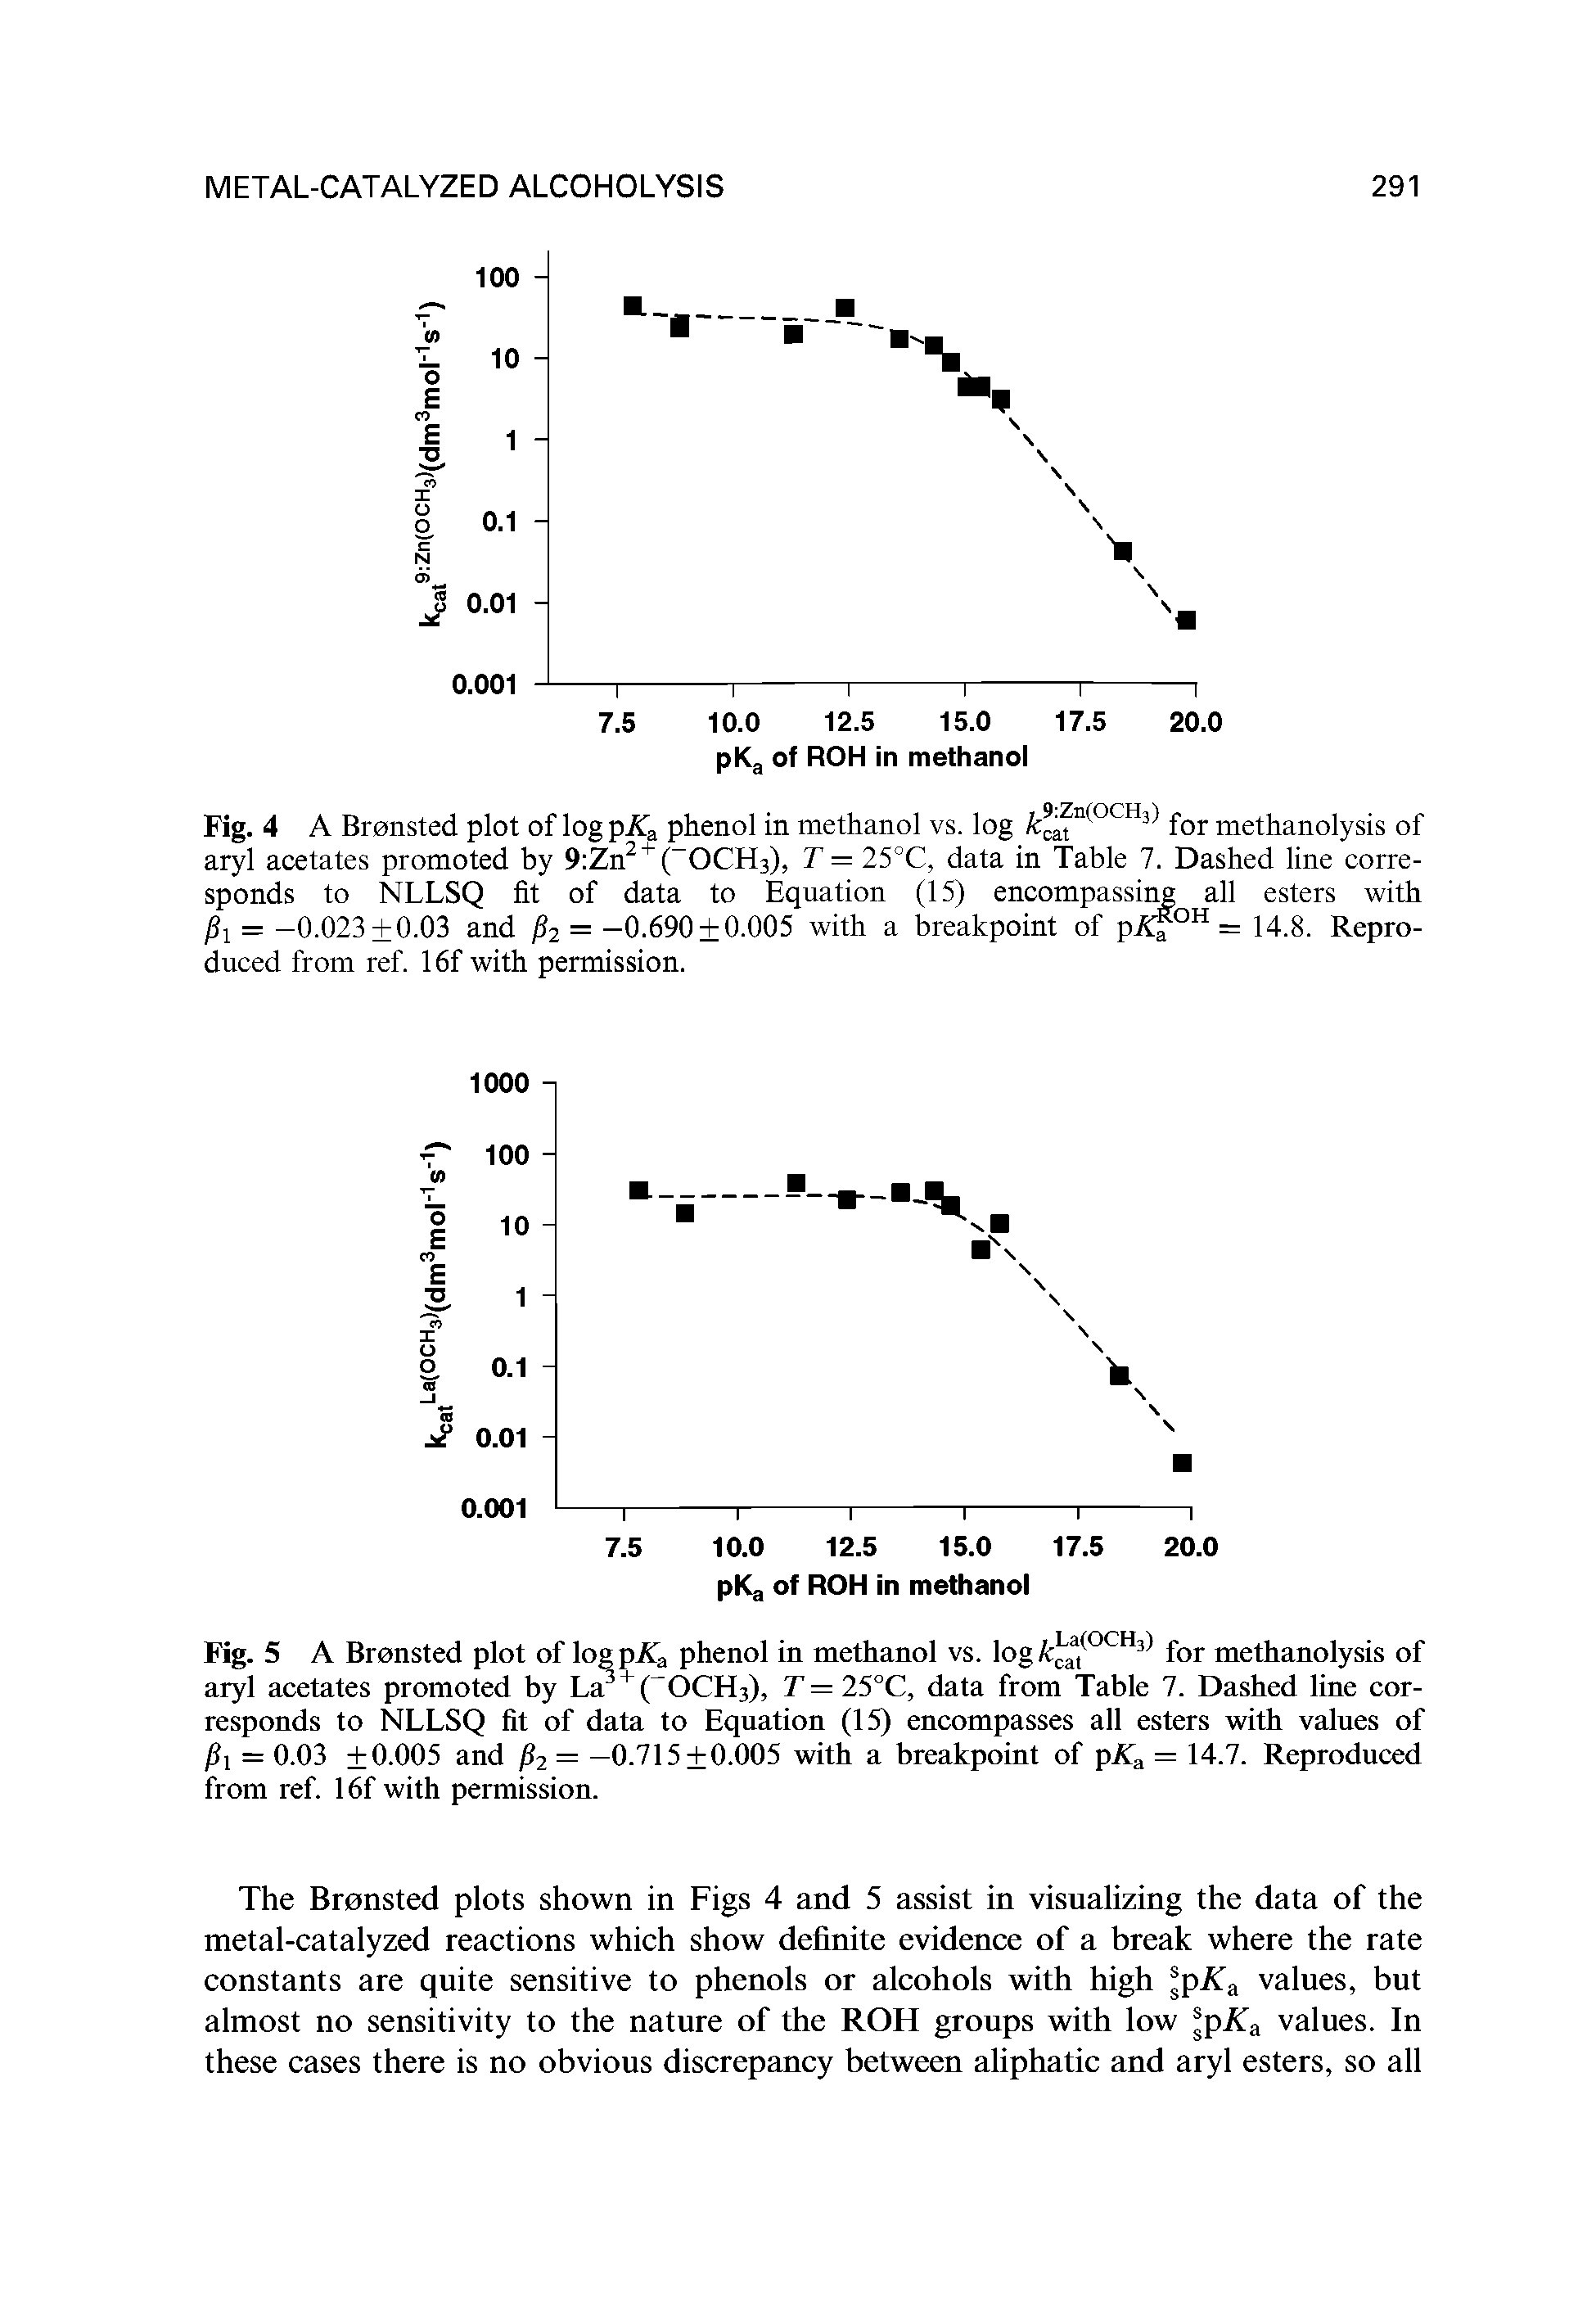 Fig. 4 A Bronsted plot of log pKz phenol in methanol vs. log fcaa fn( OCH3-) for methanolysis of aryl acetates promoted by 9 Zn2 + ( OCH3), T = 25°C, data in Table 7. Dashed line corresponds to NLLSQ fit of data to Equation (15) encompassing all esters with Pi = -0.023 0.03 and f 2 = -0.690 0.005 with a breakpoint of pJTa H = 14.8. Reproduced from ref. 16f with permission.